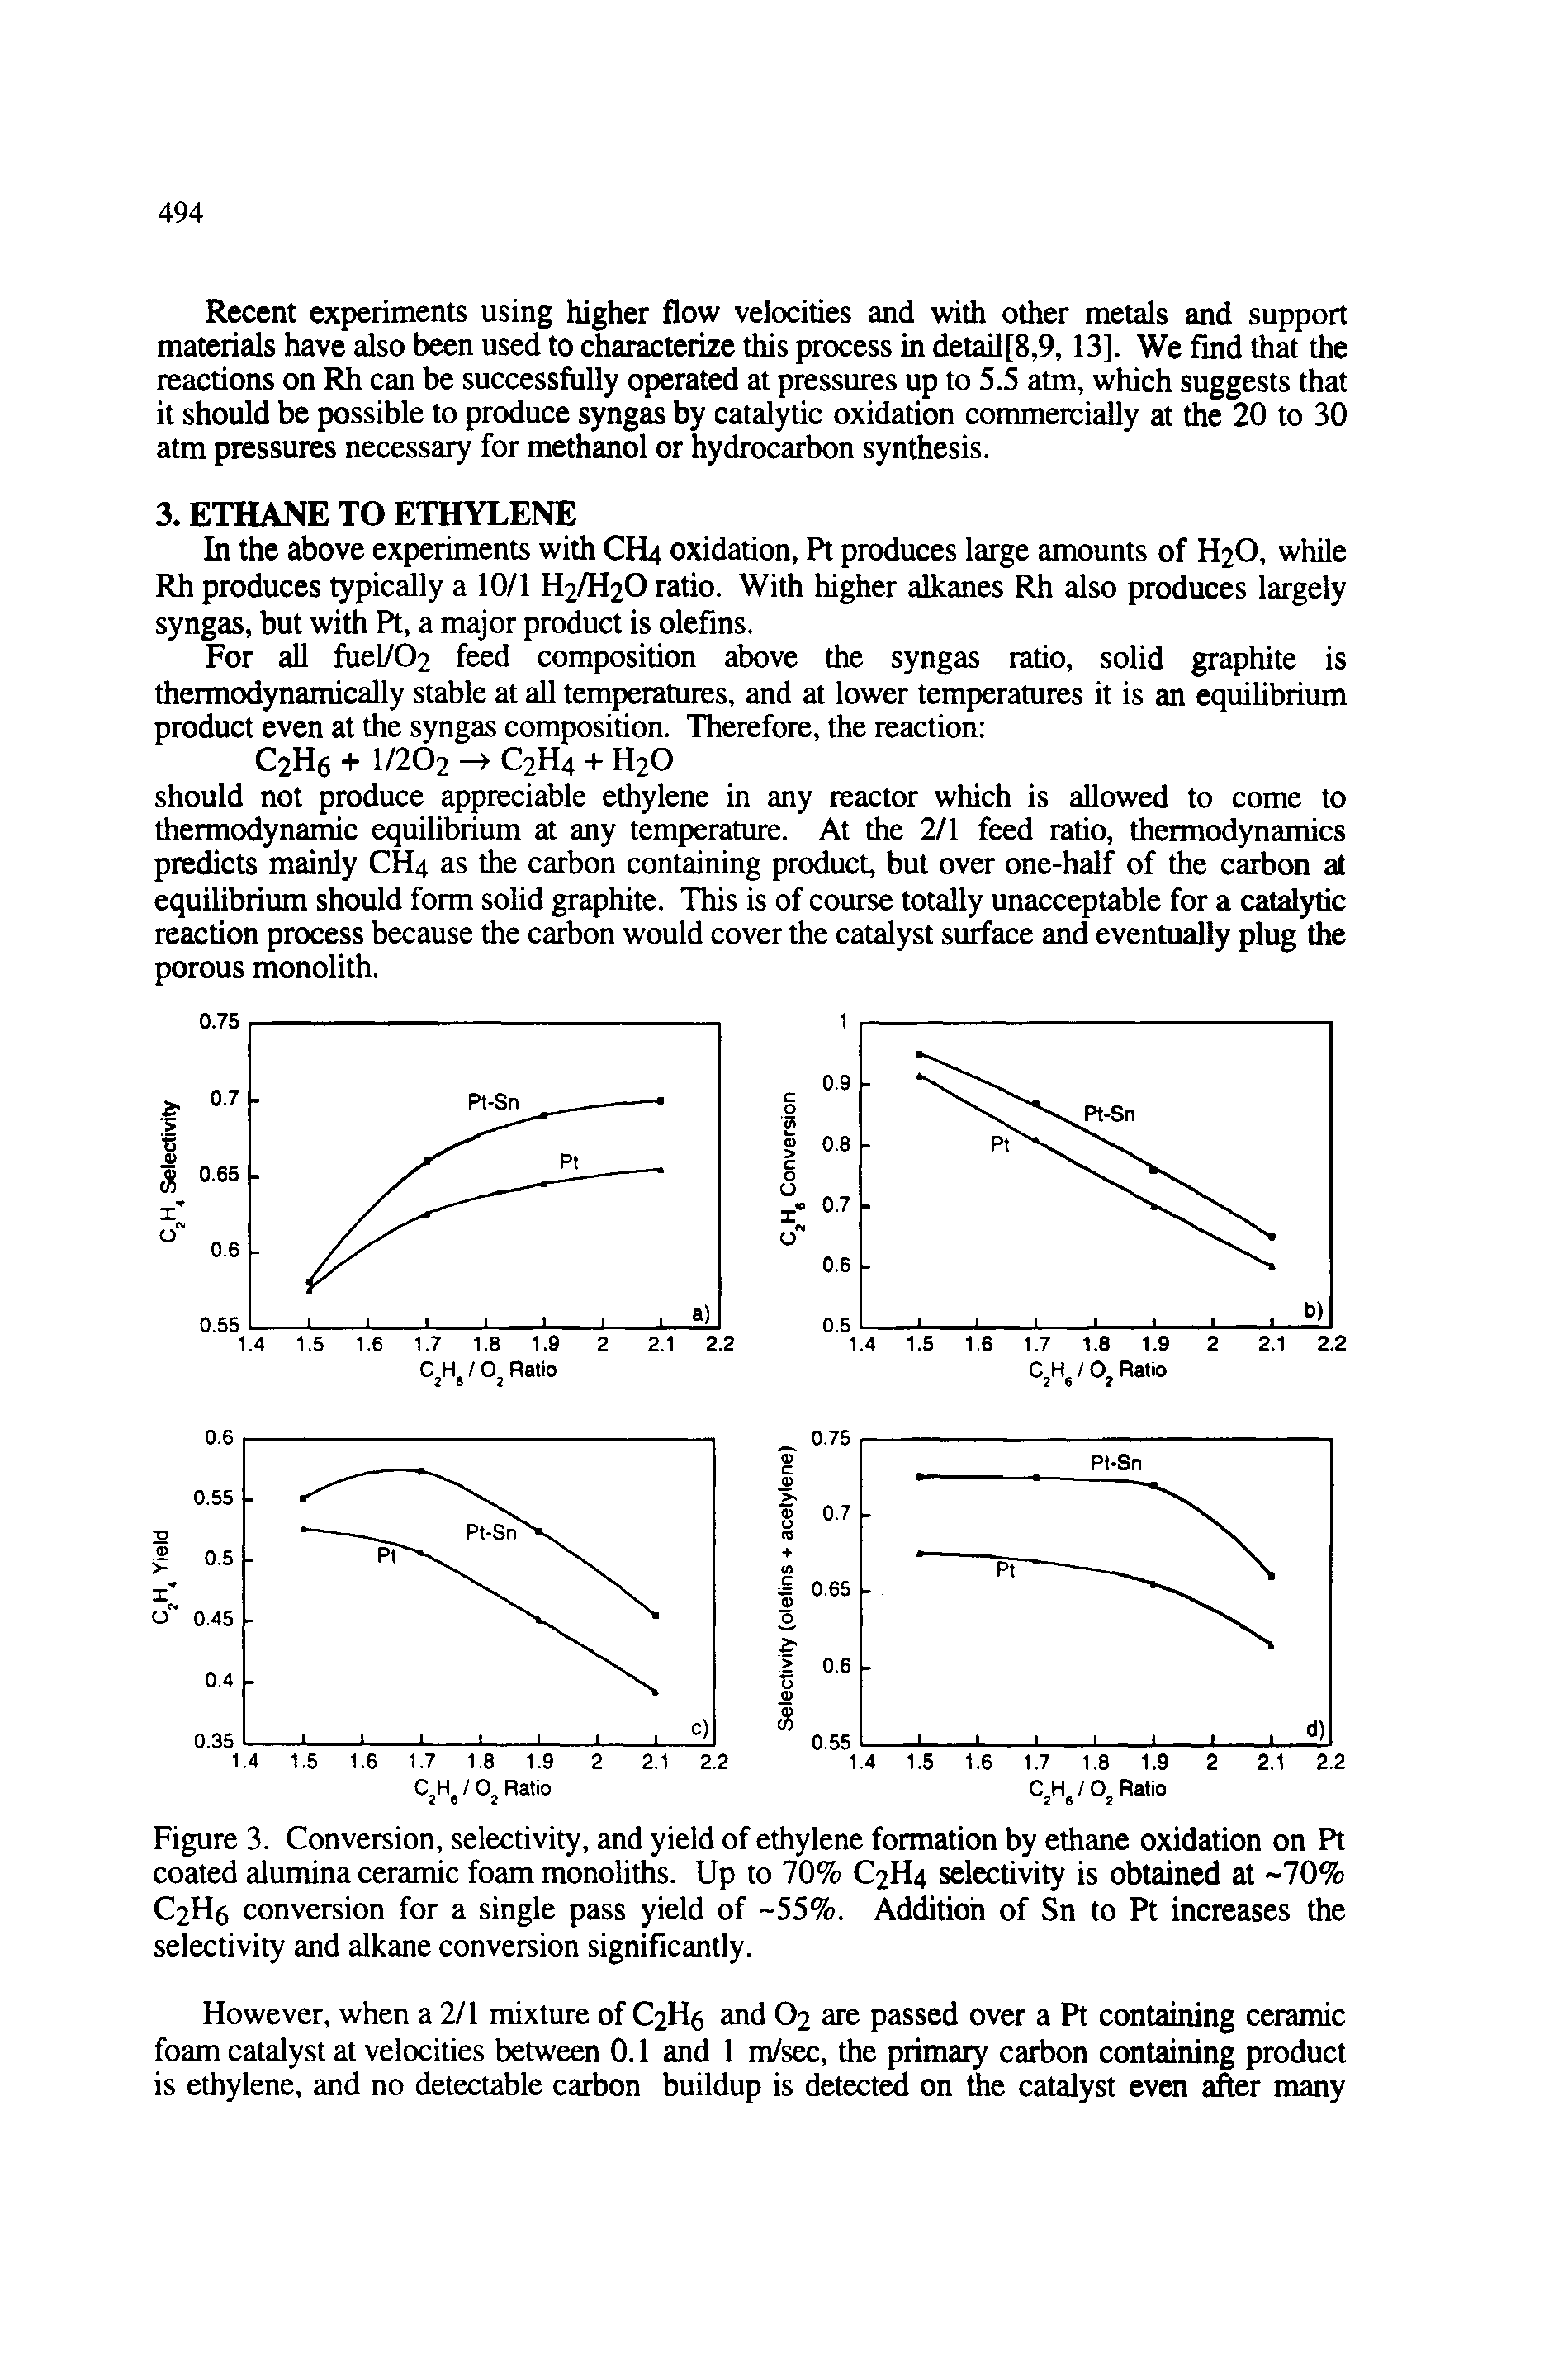 Figure 3. Conversion, selectivity, and yield of ethylene formation by ethane oxidation on Pt coated alumina ceramic foam monoliths. Up to 70% C2H4 selectivity is obtained at -70% C2H6 conversion for a single pass yield of -55%. Addition of Sn to Pt increases the selectivity and alkane conversion significantly.